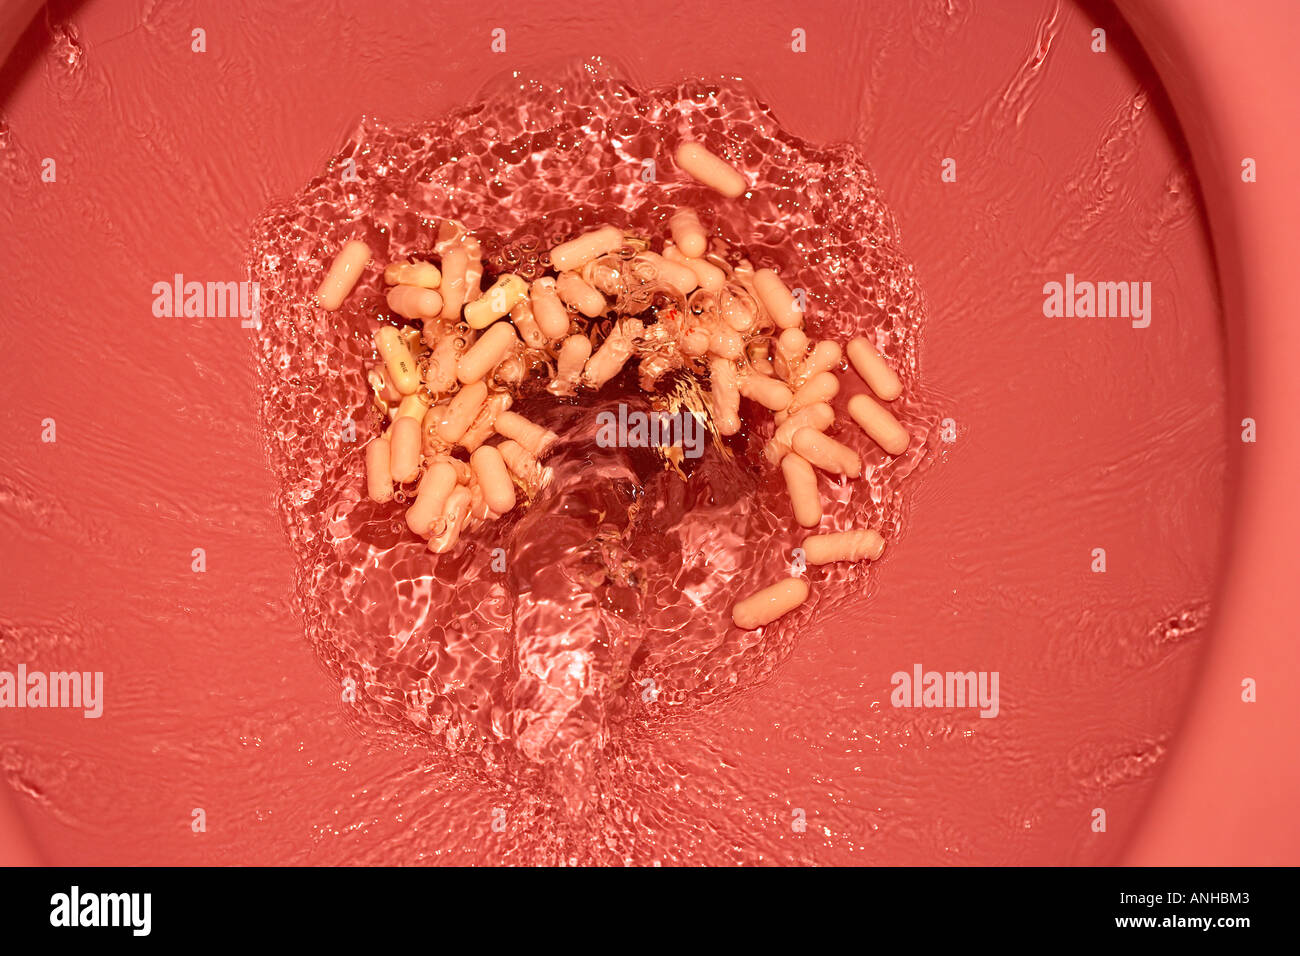 Pills Being Flushed down a Toilet Stock Photo